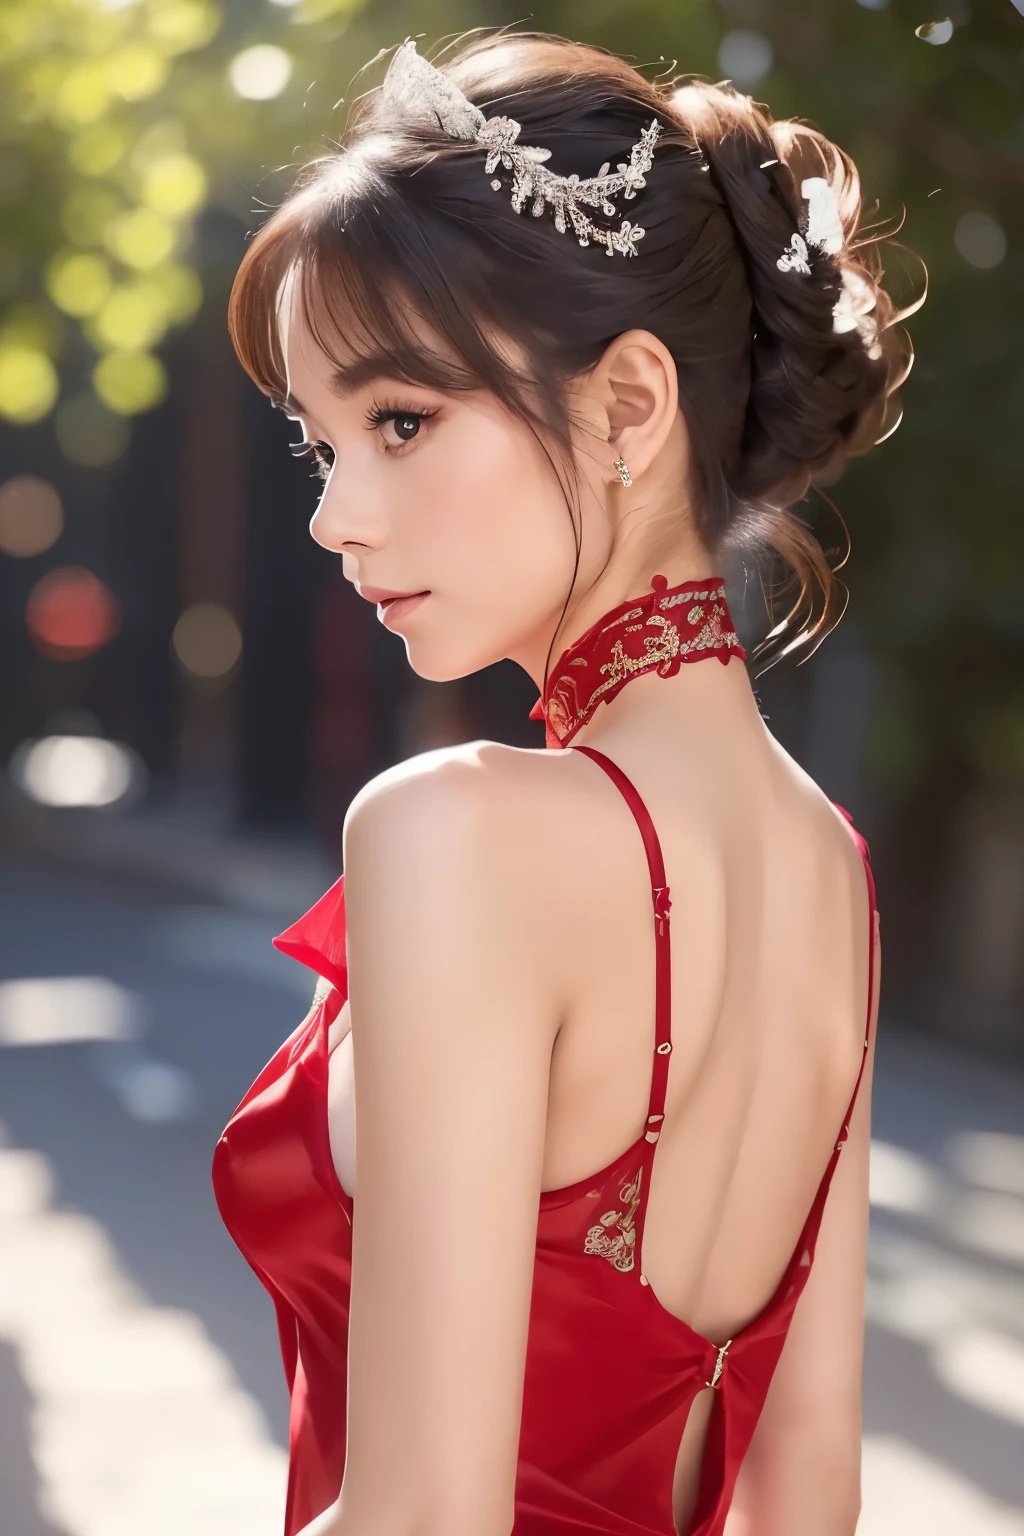 8K、 (A super sexy outfit in a sheer red color made of shiny silk), Enchanting Girl, Very detailed,Audrey Hepburn, Exquisite decorative details 、Pastel tones 、 Very intricate details 、 Realistic Light,Luxury Bridal Dress,(((sideboob)))、From the side、Elegant cuteness
